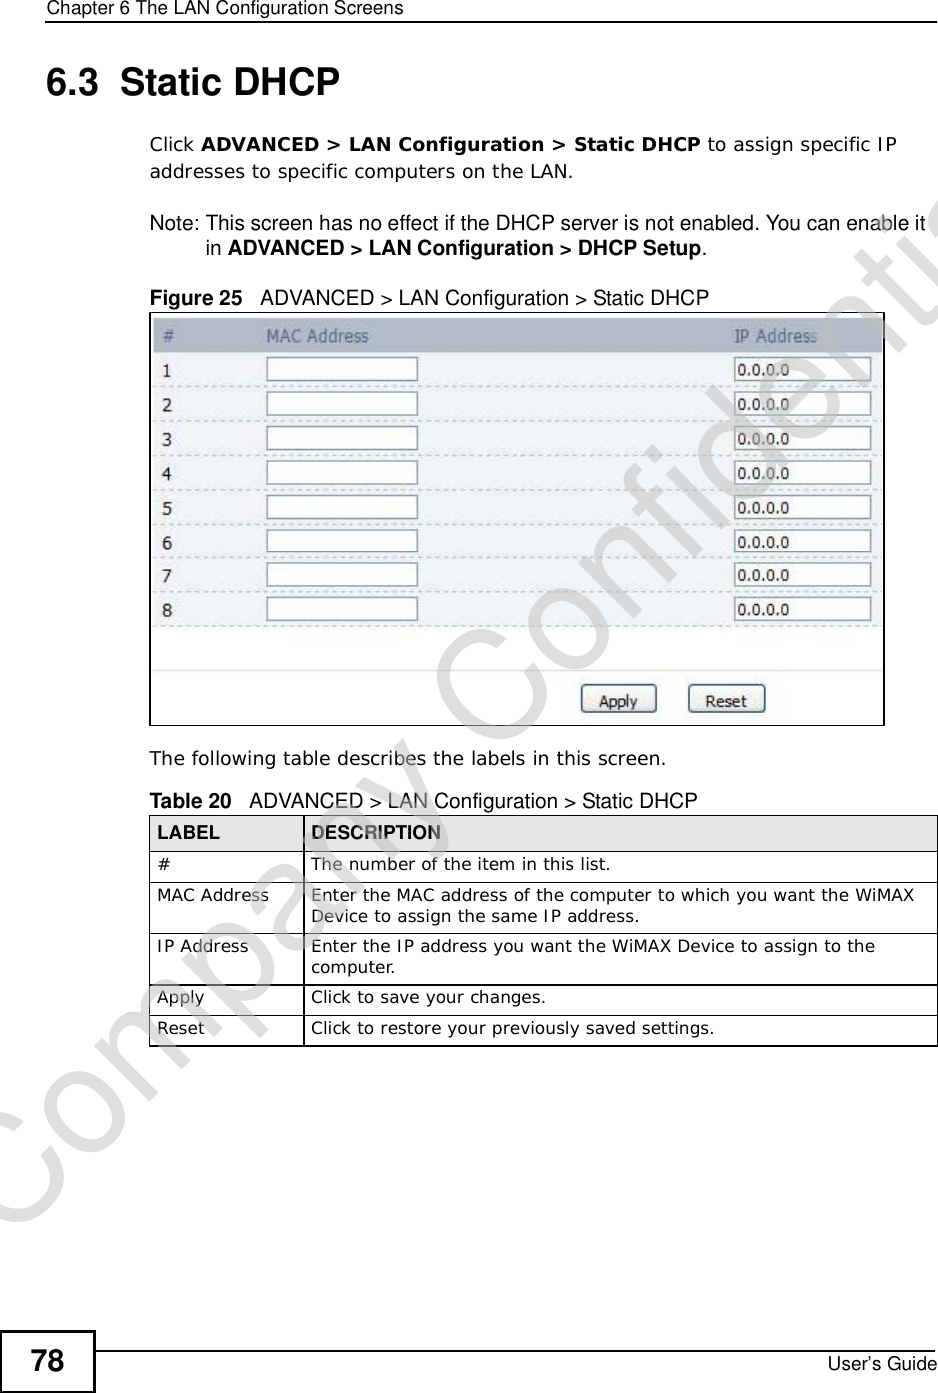 Chapter 6The LAN Configuration ScreensUser’s Guide786.3  Static DHCPClick ADVANCED &gt; LAN Configuration &gt; Static DHCP to assign specific IP addresses to specific computers on the LAN.Note: This screen has no effect if the DHCP server is not enabled. You can enable it in ADVANCED &gt; LAN Configuration &gt; DHCP Setup.Figure 25   ADVANCED &gt; LAN Configuration &gt; Static DHCPThe following table describes the labels in this screen. Table 20   ADVANCED &gt; LAN Configuration &gt; Static DHCPLABEL DESCRIPTION#The number of the item in this list.MAC Address Enter the MAC address of the computer to which you want the WiMAX Device to assign the same IP address.IP Address Enter the IP address you want the WiMAX Device to assign to the computer.Apply Click to save your changes.Reset Click to restore your previously saved settings.Company Confidential